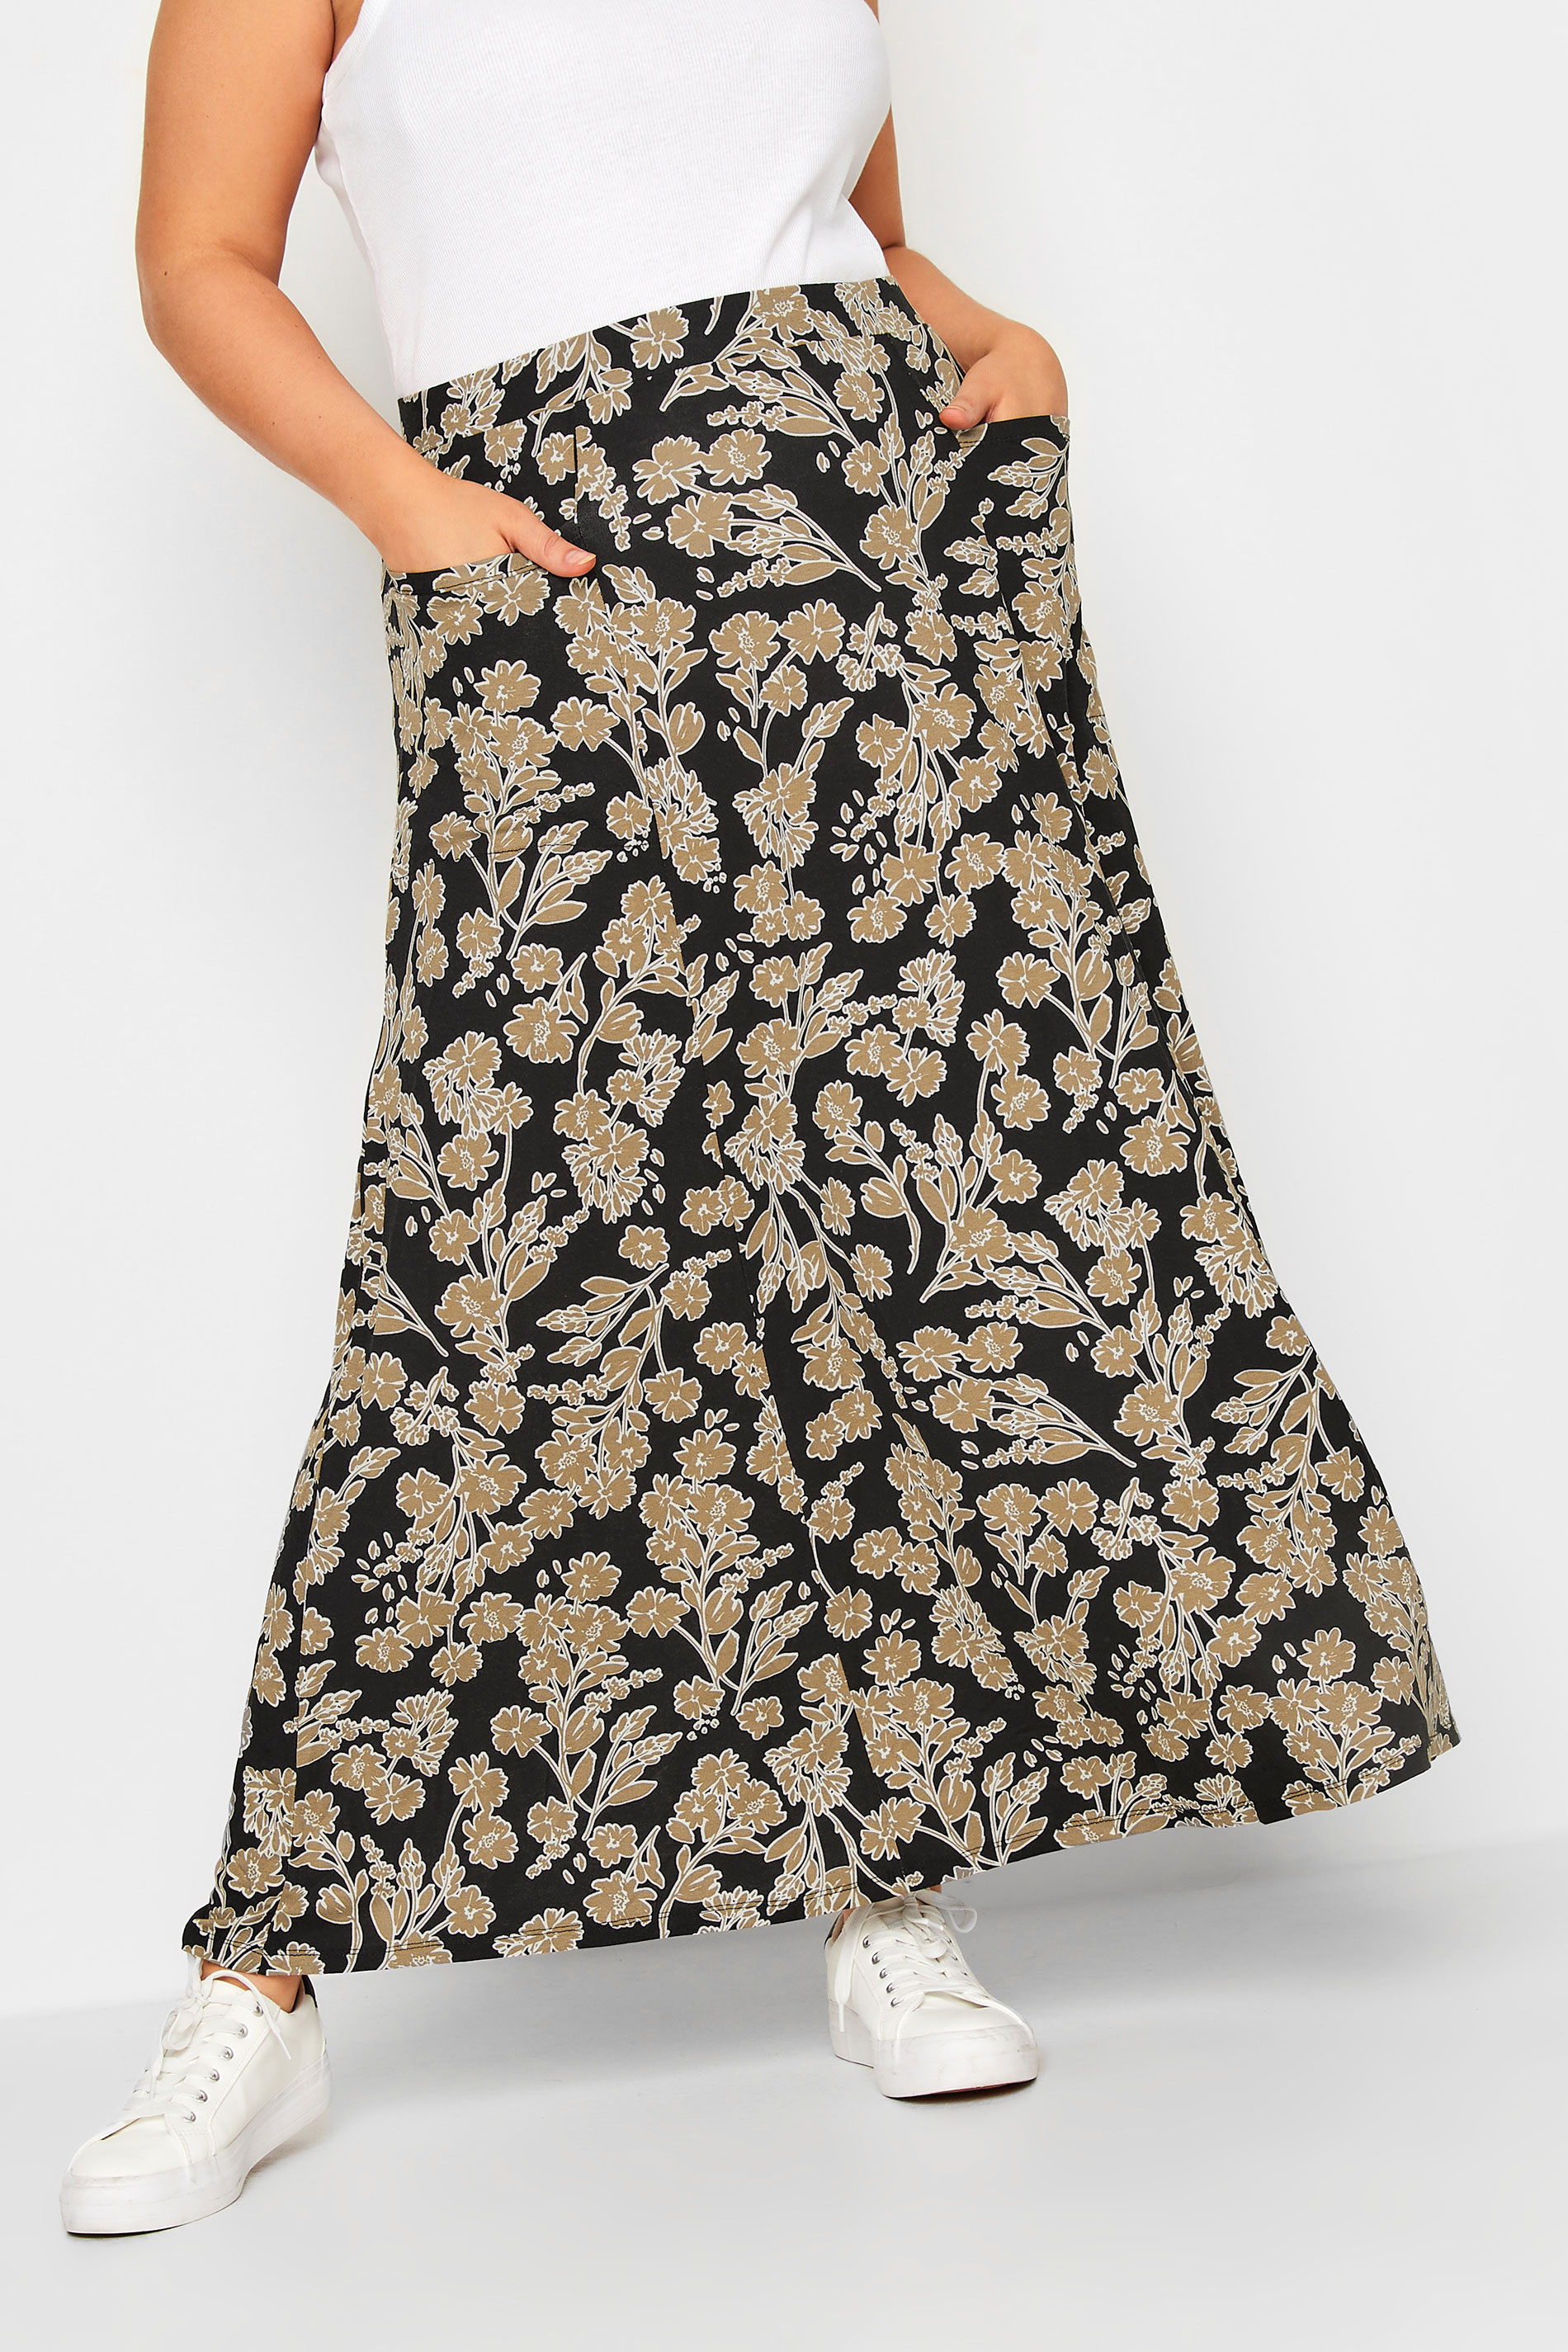 YOURS Curve Black Floral Print Pocket Detail Maxi Skirt | Yours Clothing 1